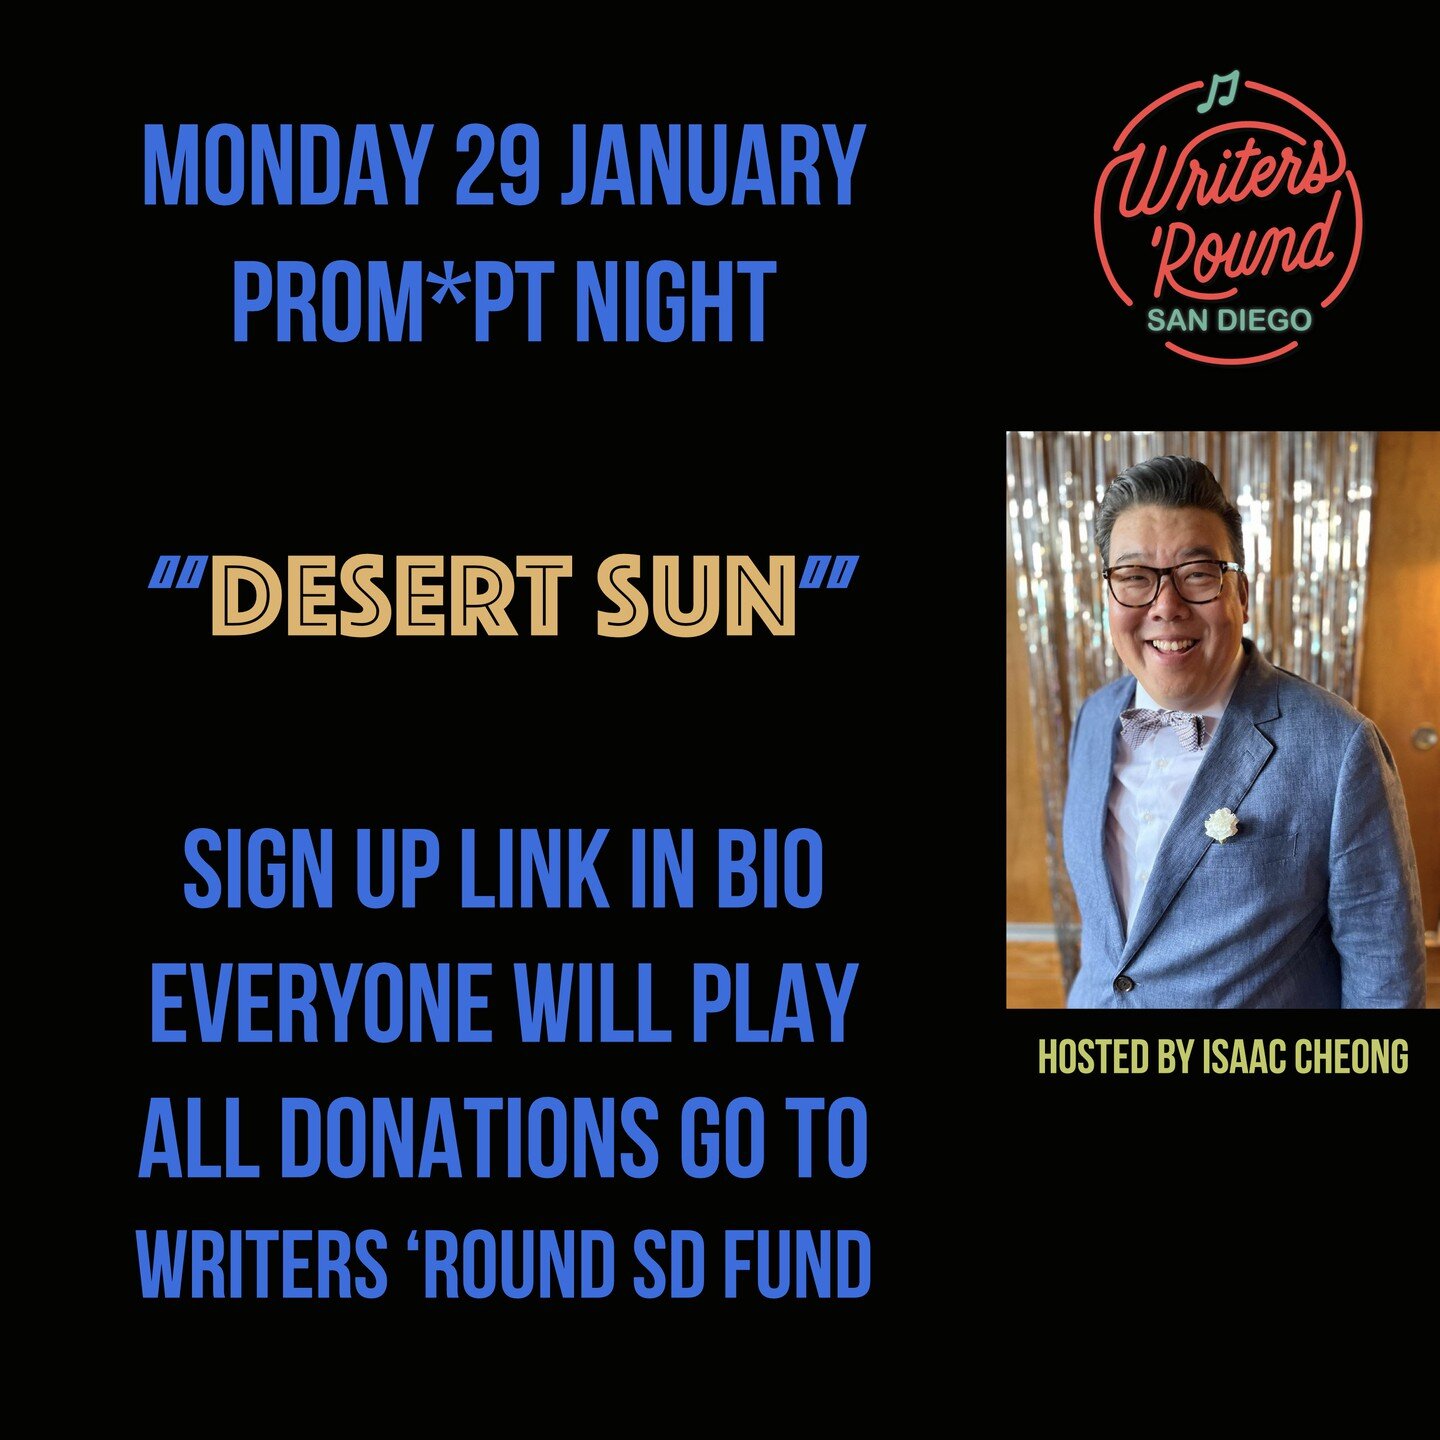 Mon. 29 January is our monthly PROM*PT NIGHT! Hosted by the illustrious @sheblondeswede! 

The prompt for this month is &quot;Desert Sun&quot;, and everyone who sign up with a prompt song will get a chance to play! Sign ups are in the link in our bio